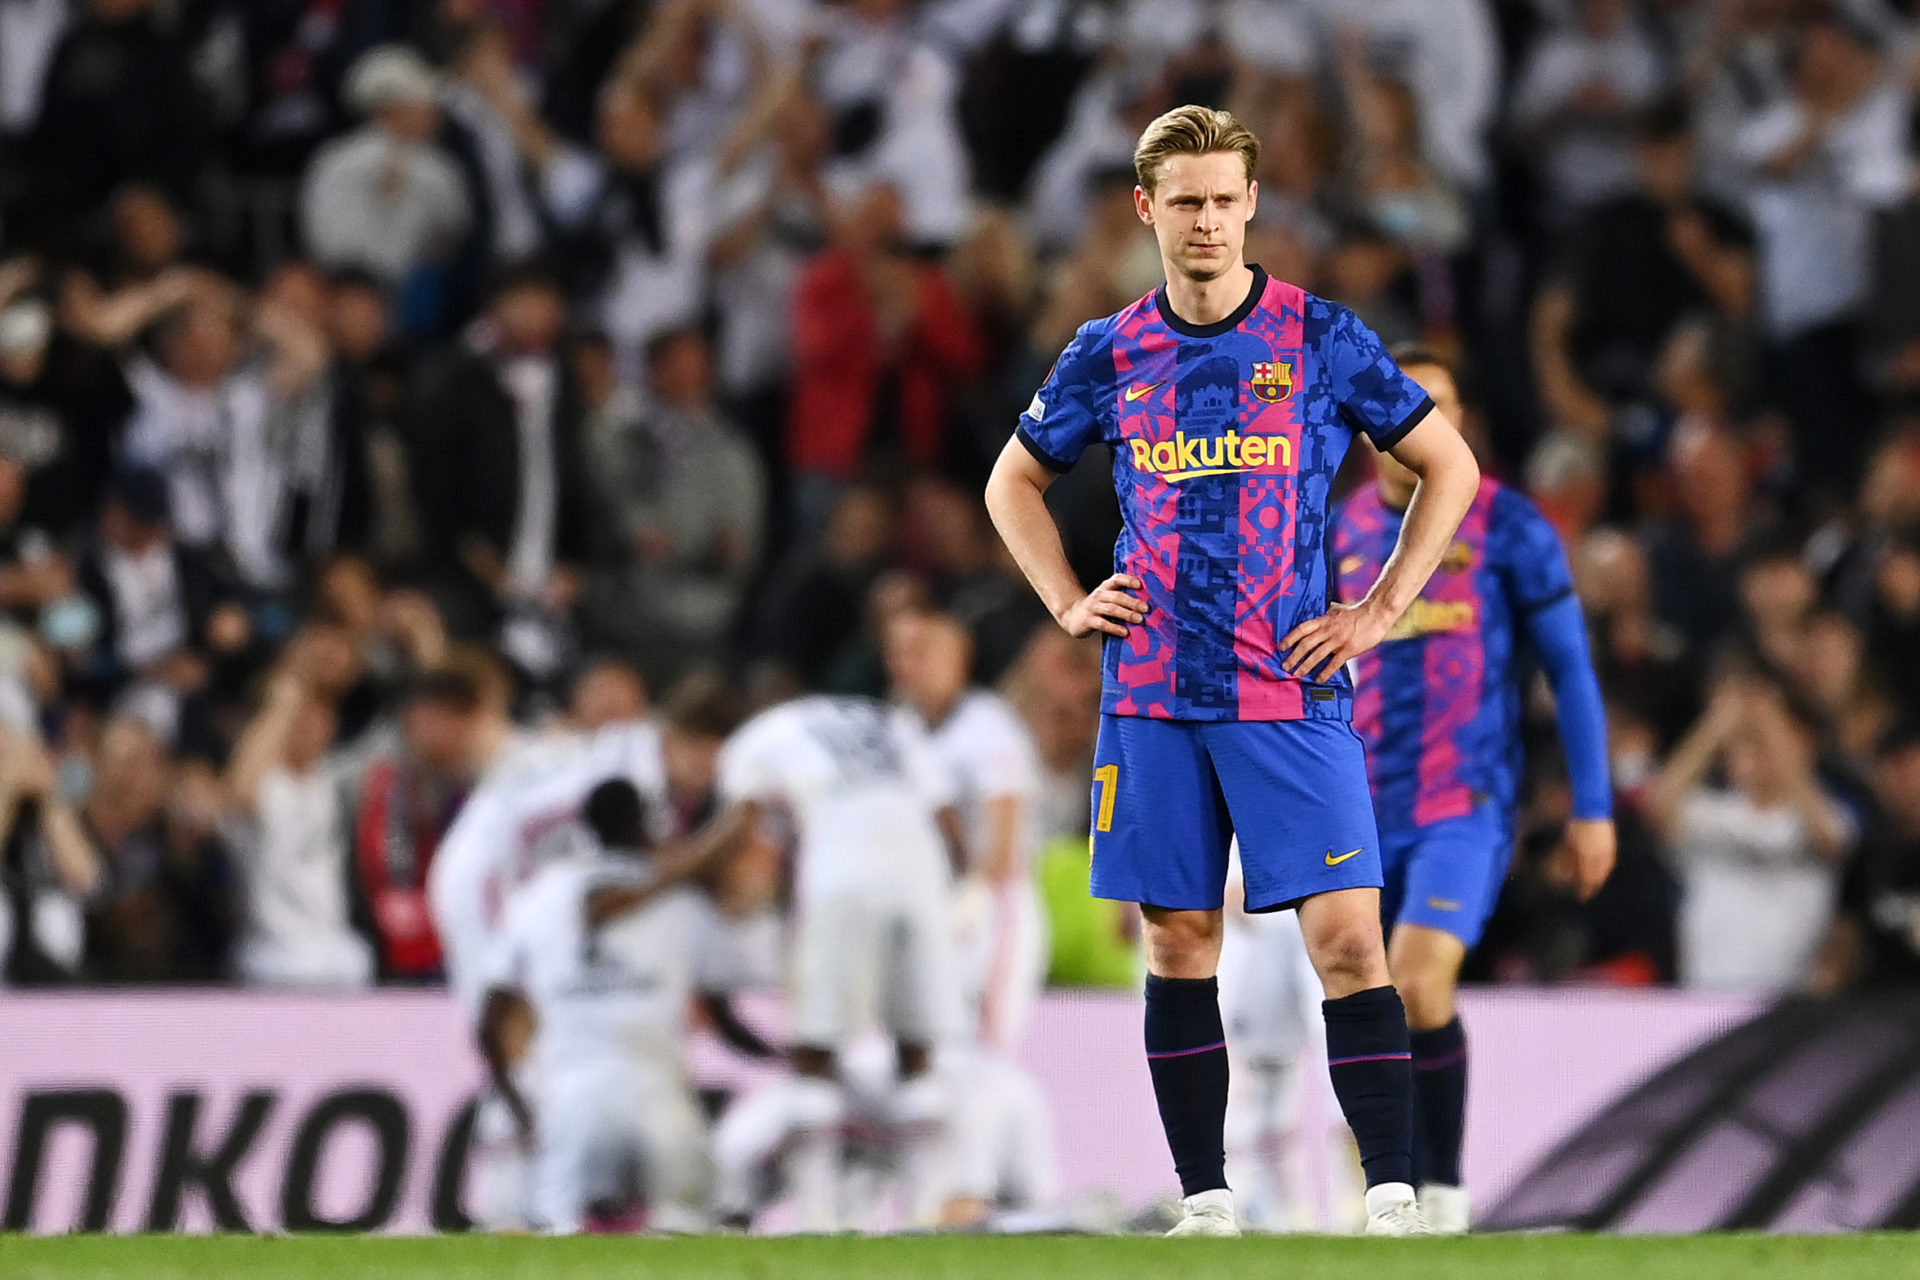 Chelsea signing Frenkie de Jong would be great news for West Ham